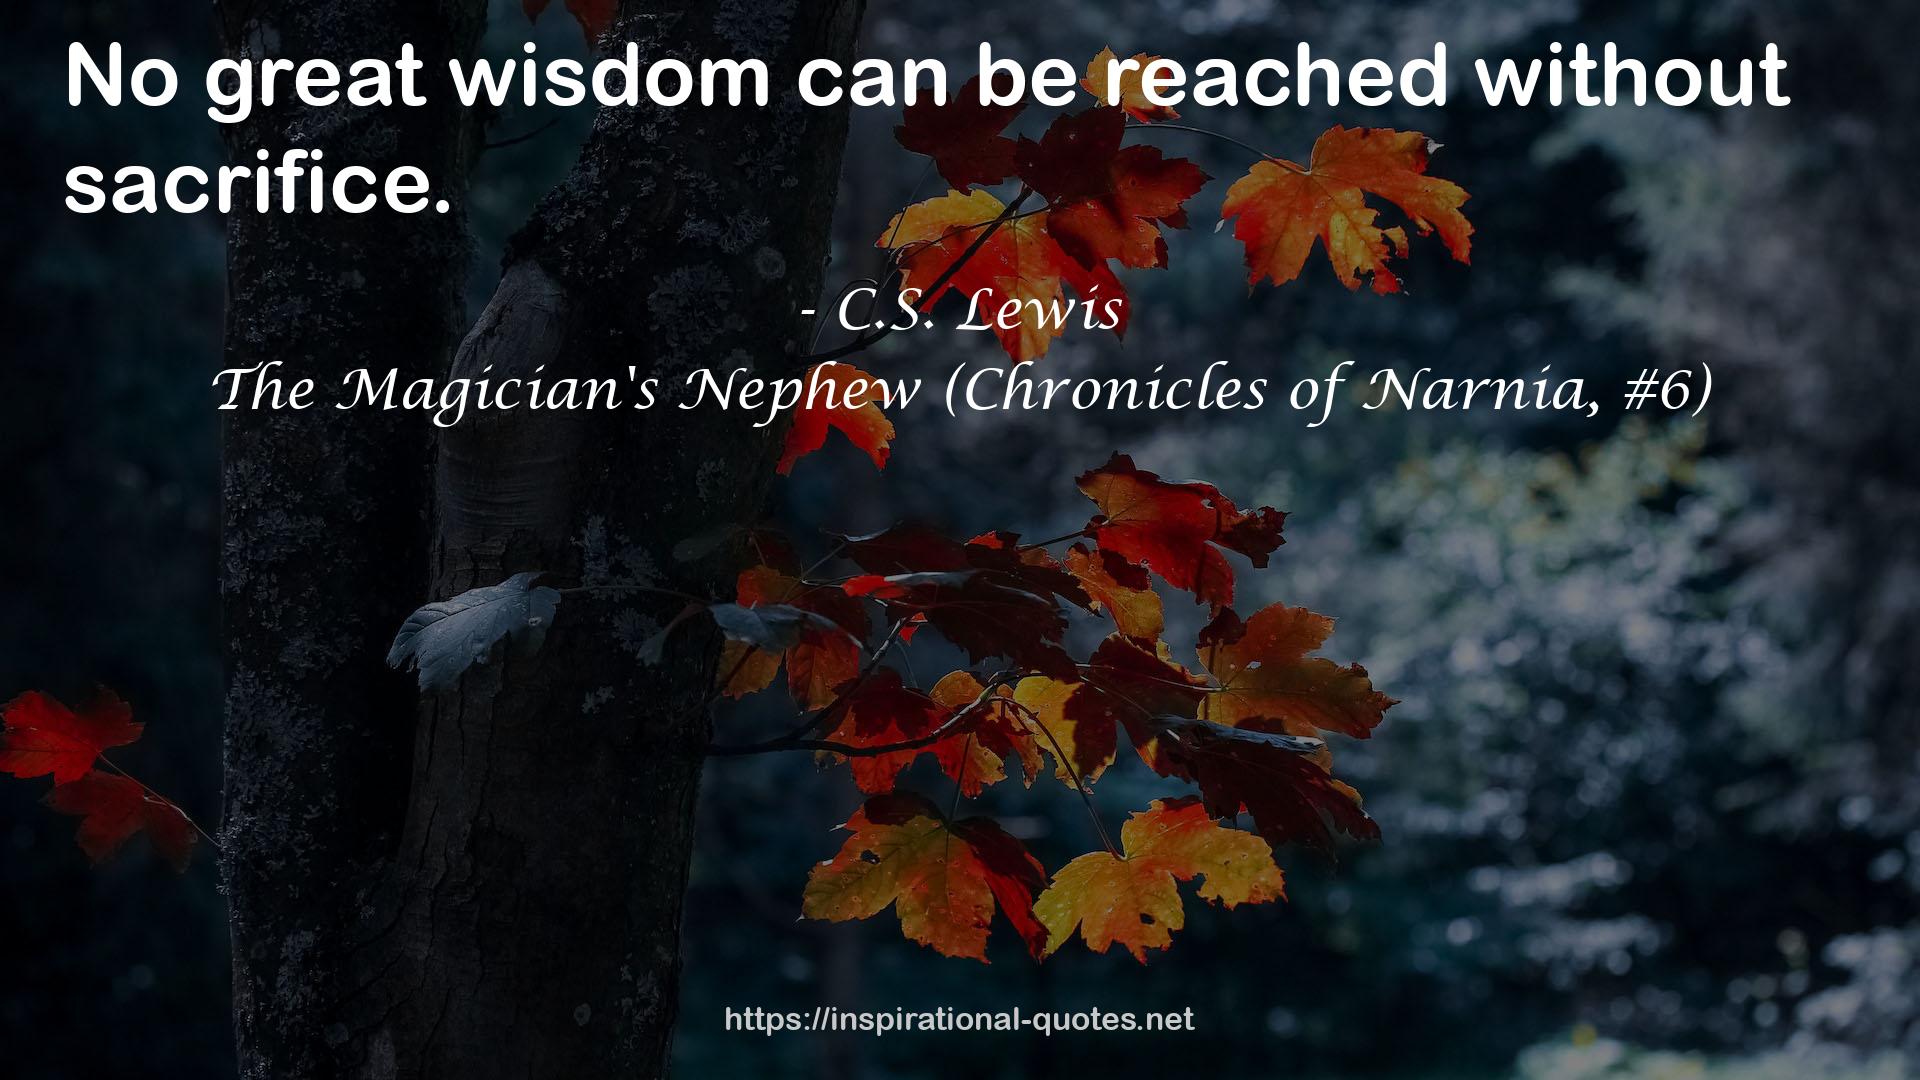 The Magician's Nephew (Chronicles of Narnia, #6) QUOTES